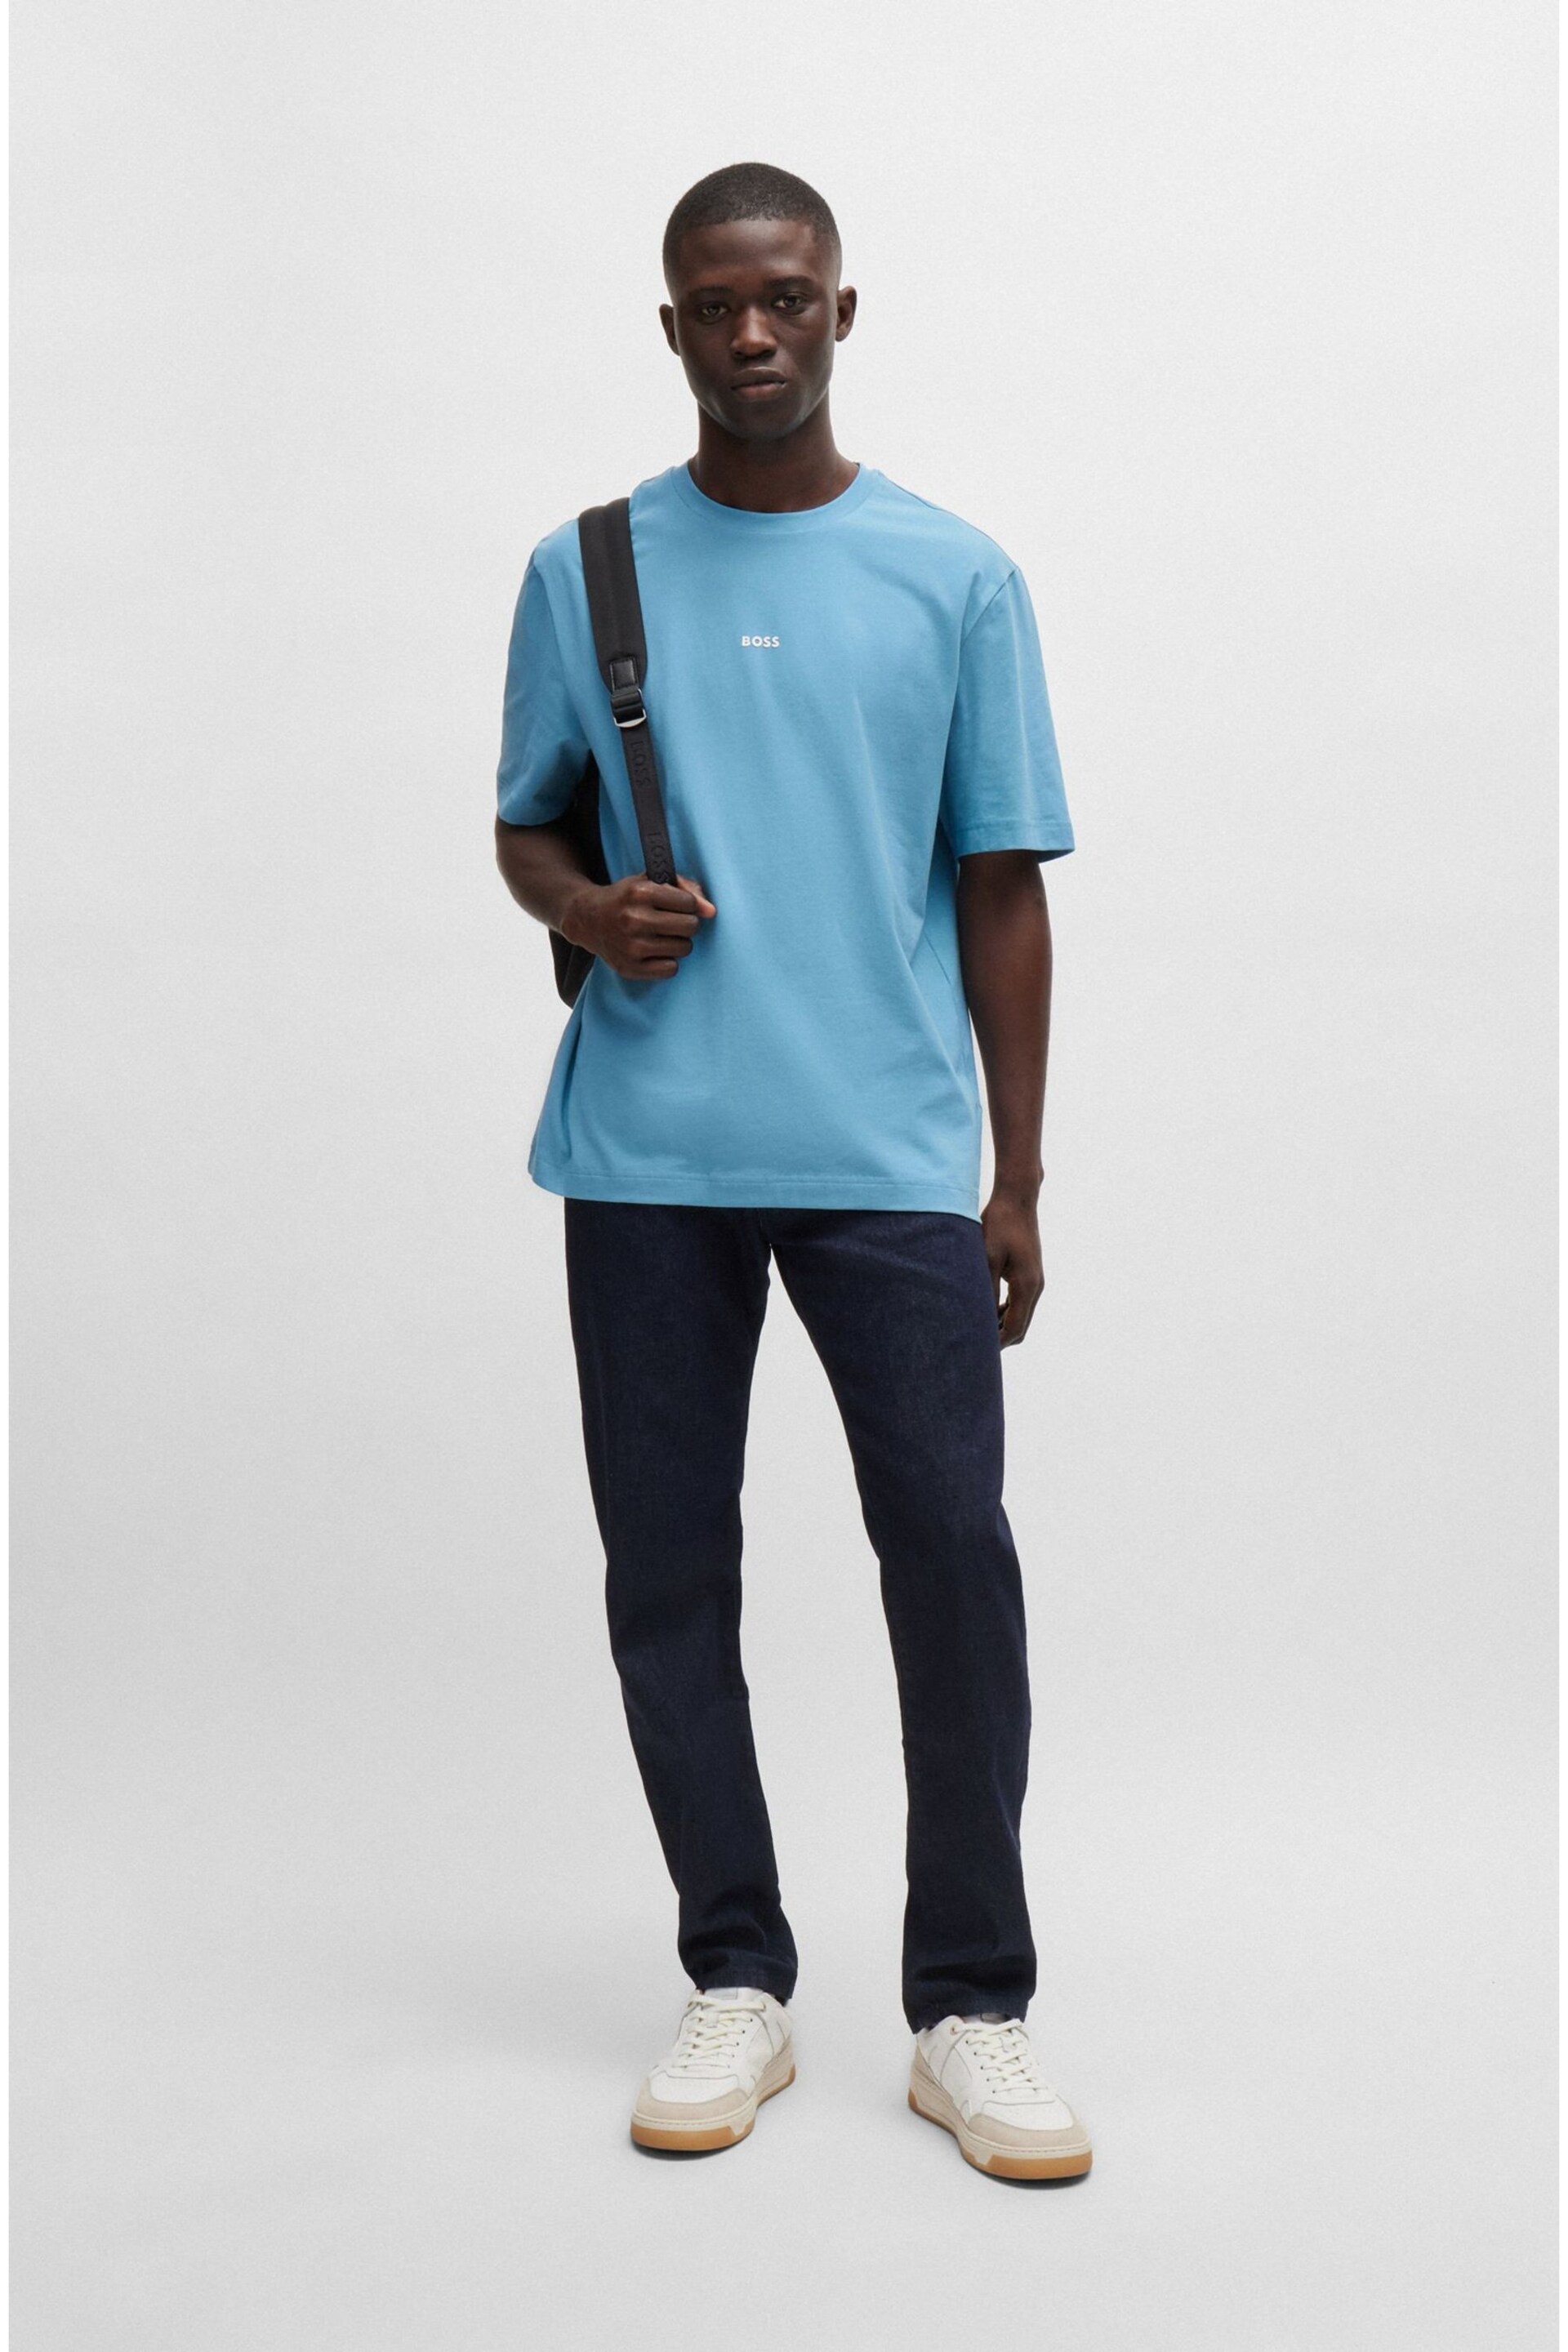 BOSS Blue Relaxed-Fit T-Shirt in Stretch Cotton With Logo Print - Image 2 of 5